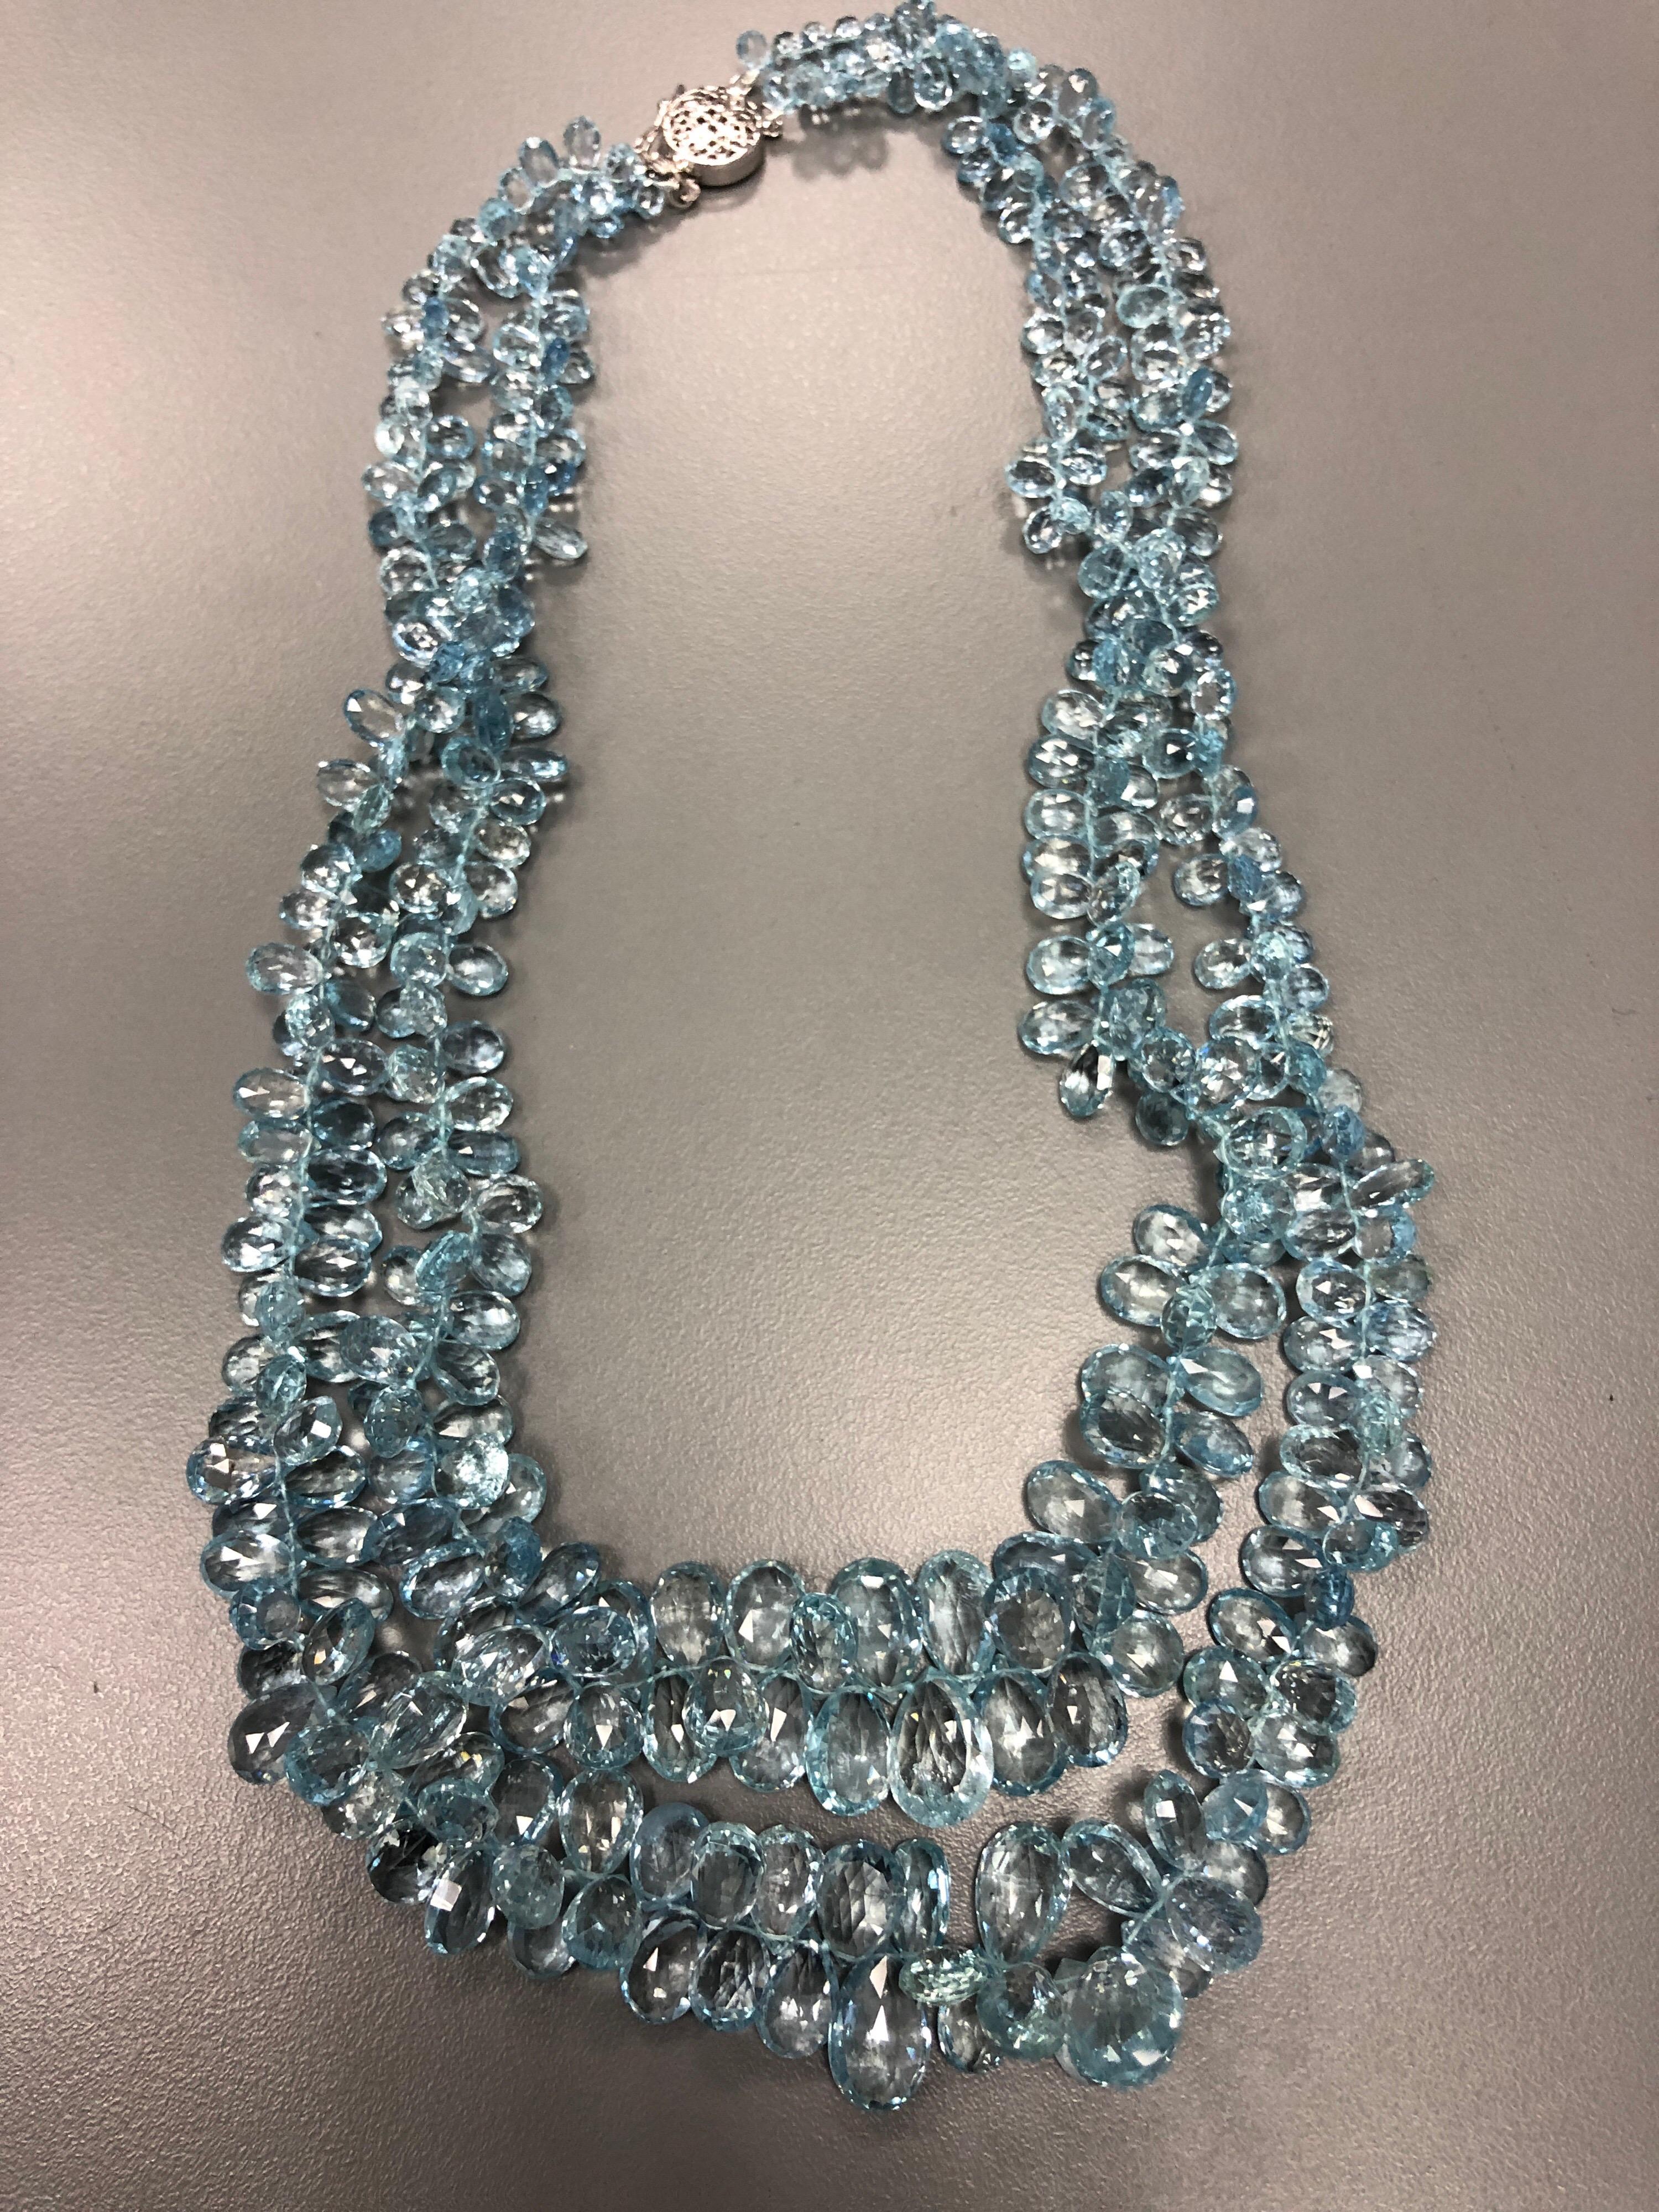 The necklace which contains approximately over 400 carats of fine faceted aquamarine beads, eye clean and with a lovely saturated blue color, measures 18 inches long with the second strand dropping to 20 inches. It terminates to a 14K white gold